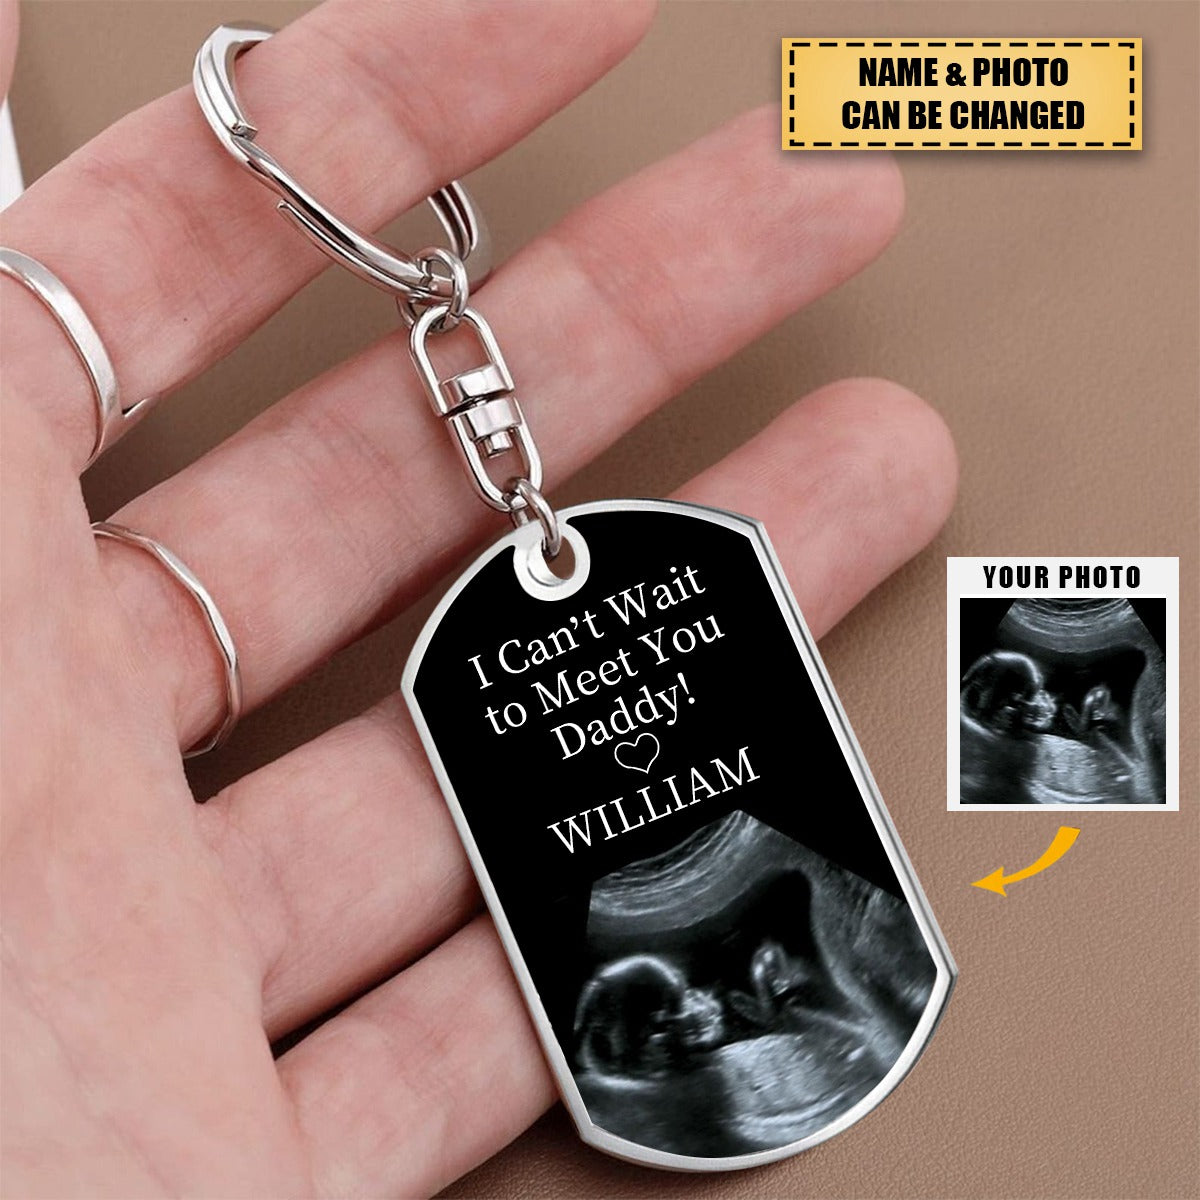 I Can't Wait Daddy -Personalized Aluminum Keychain Gift for New Dad